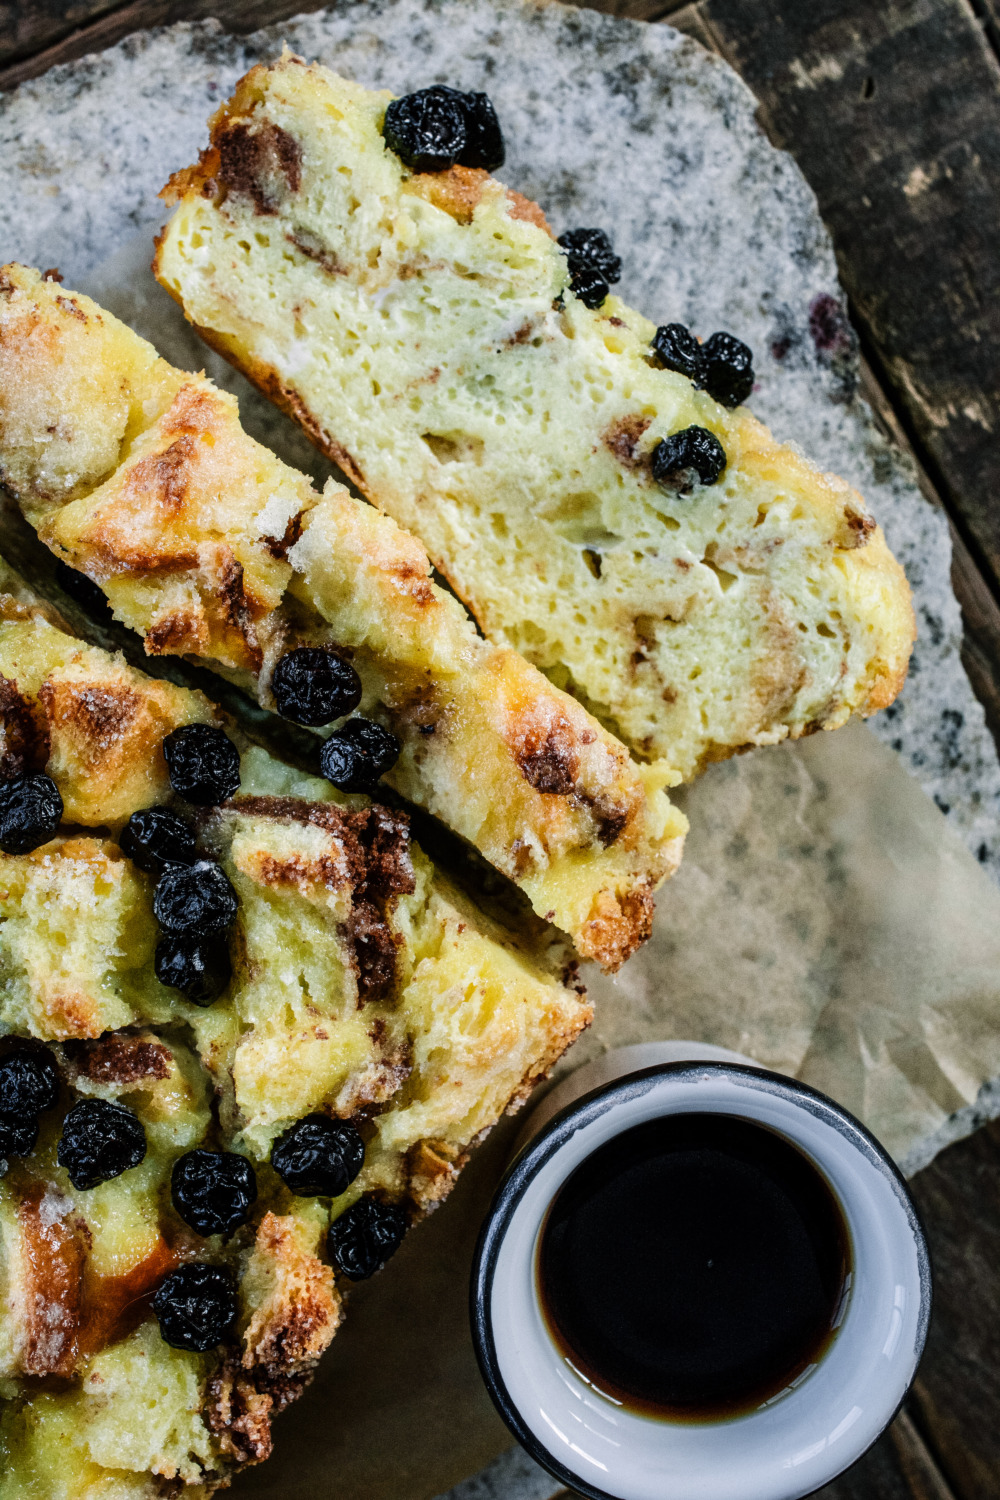 Restaurant-Style Cinnamon Bread Pudding with Blueberries | Ciao Chow ...